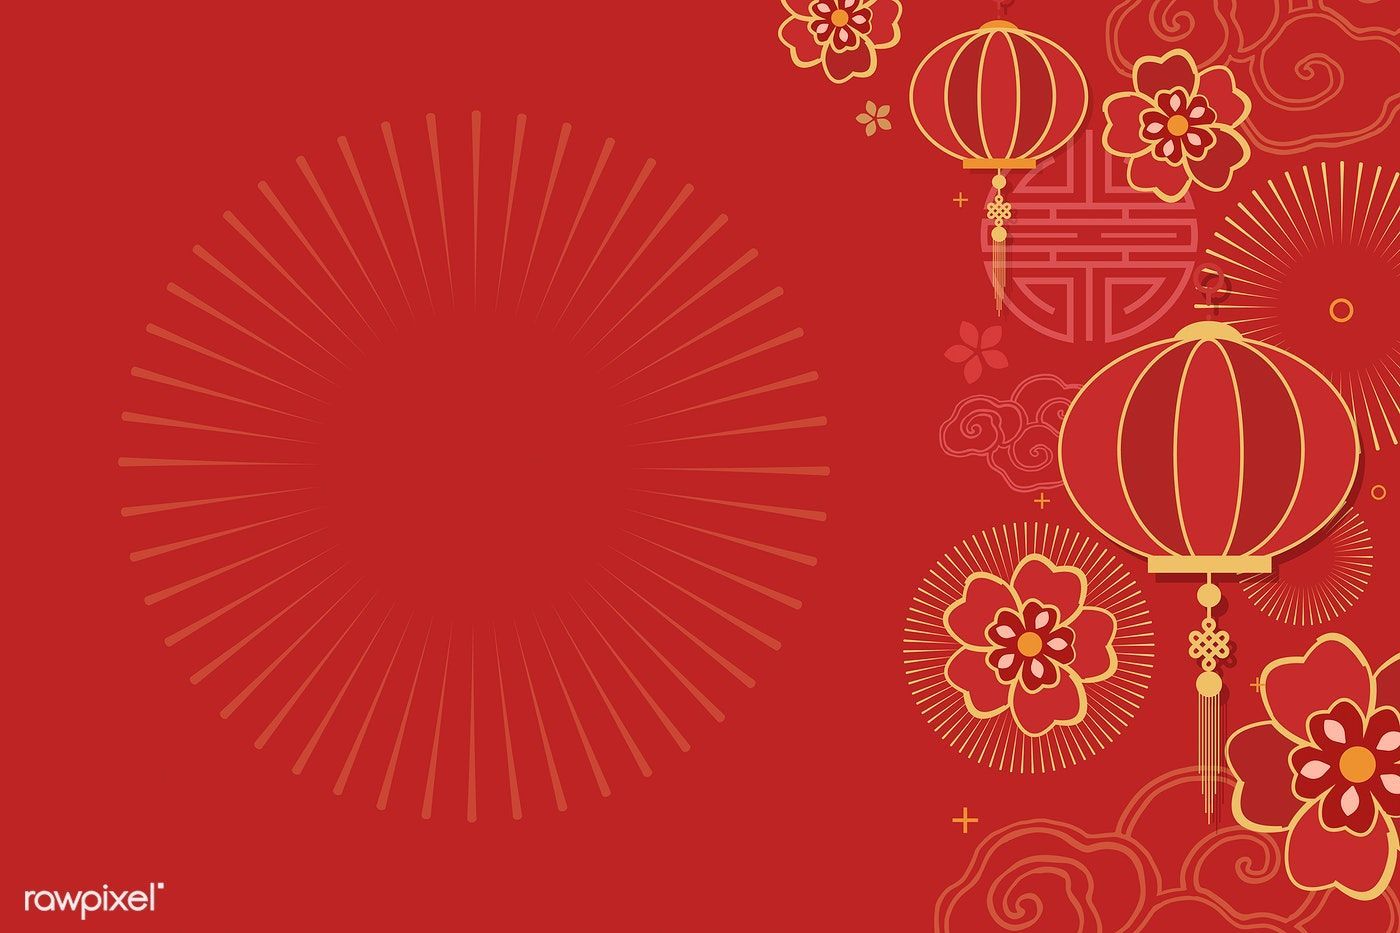 Download premium vector of Chinese new year 2019 greeting background 555236. Chinese new year background, Chinese background, Free vector art